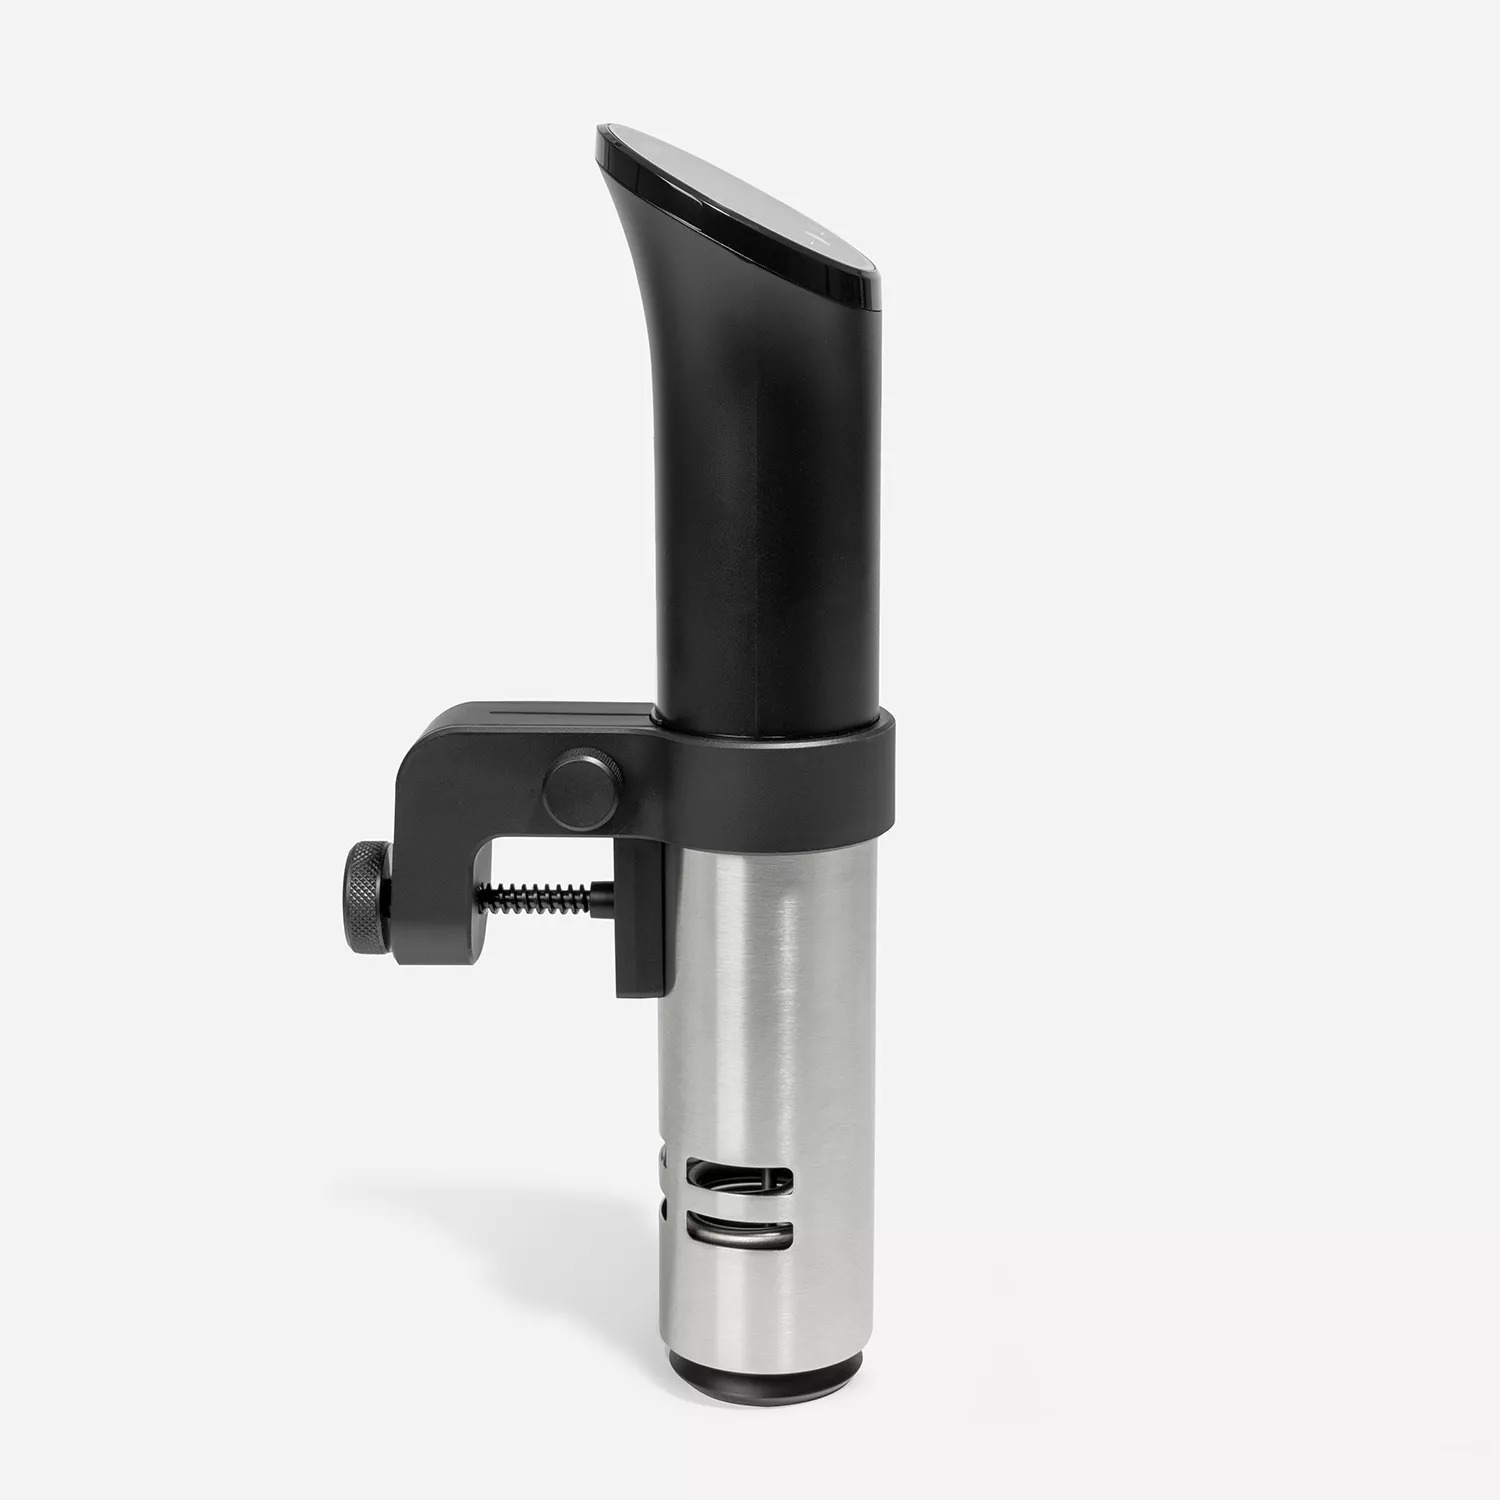 Anova Precision Cooker Review: Smart Sous Vide - Rodney Cowled